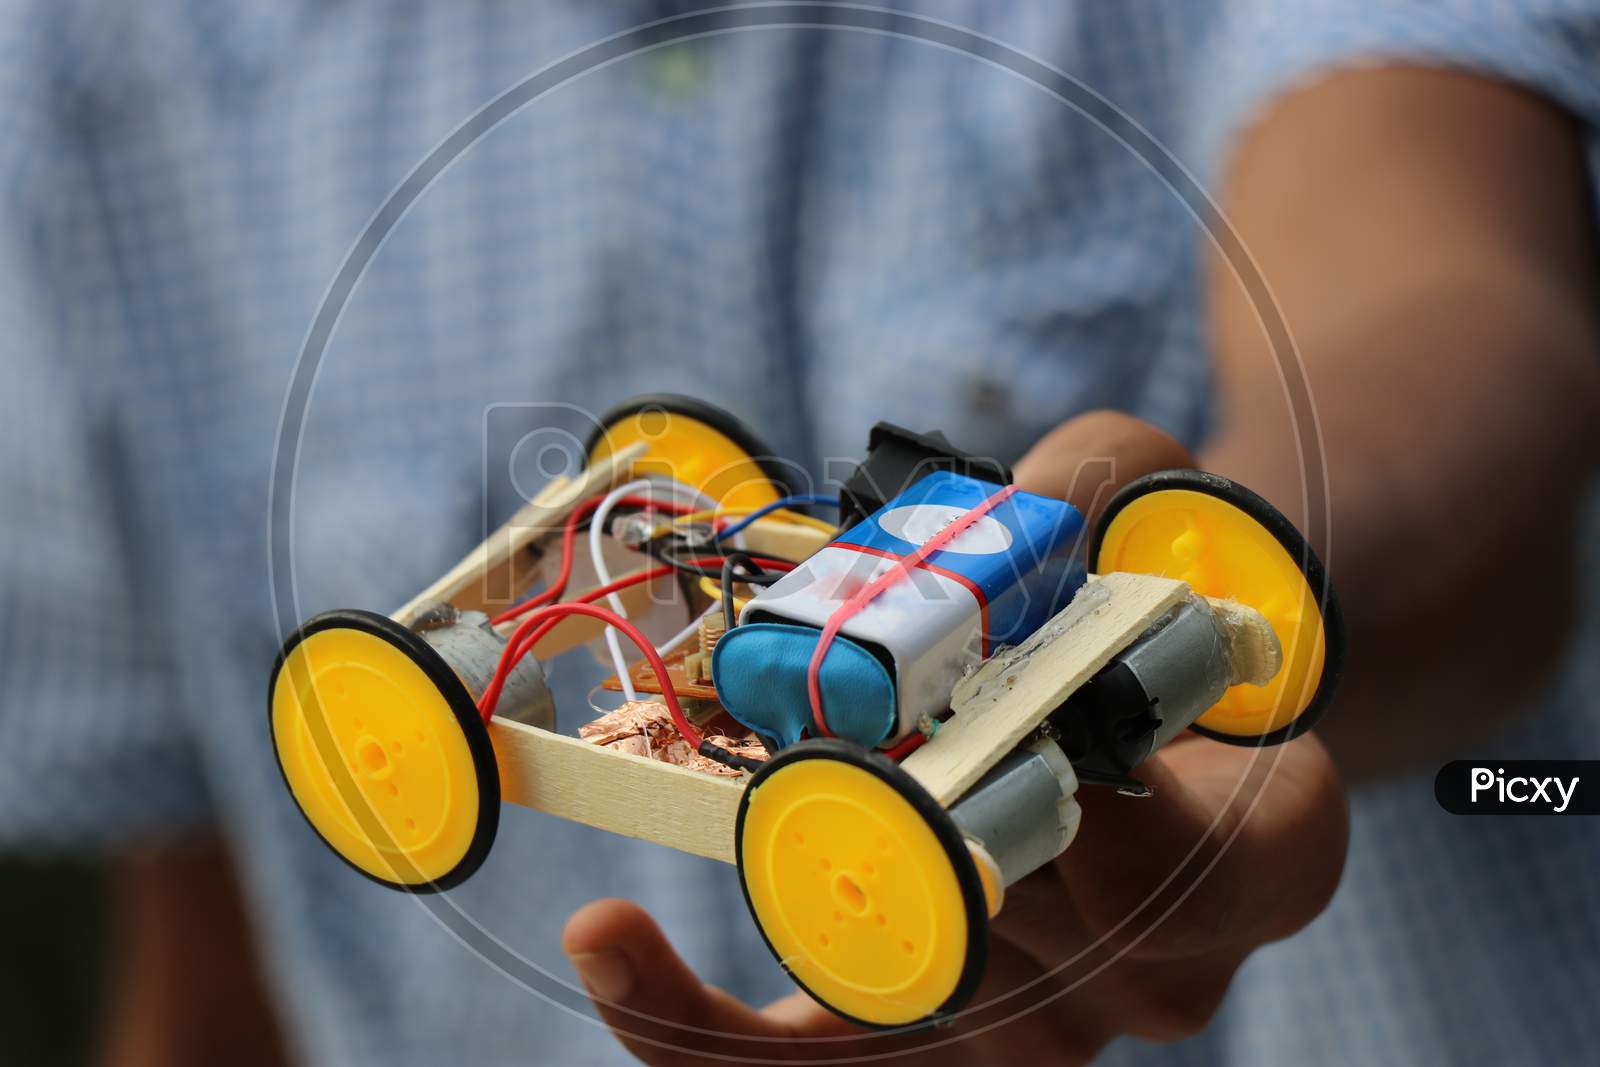 Remote Controlled Car Which Is Small And Very Fast Held In Hand